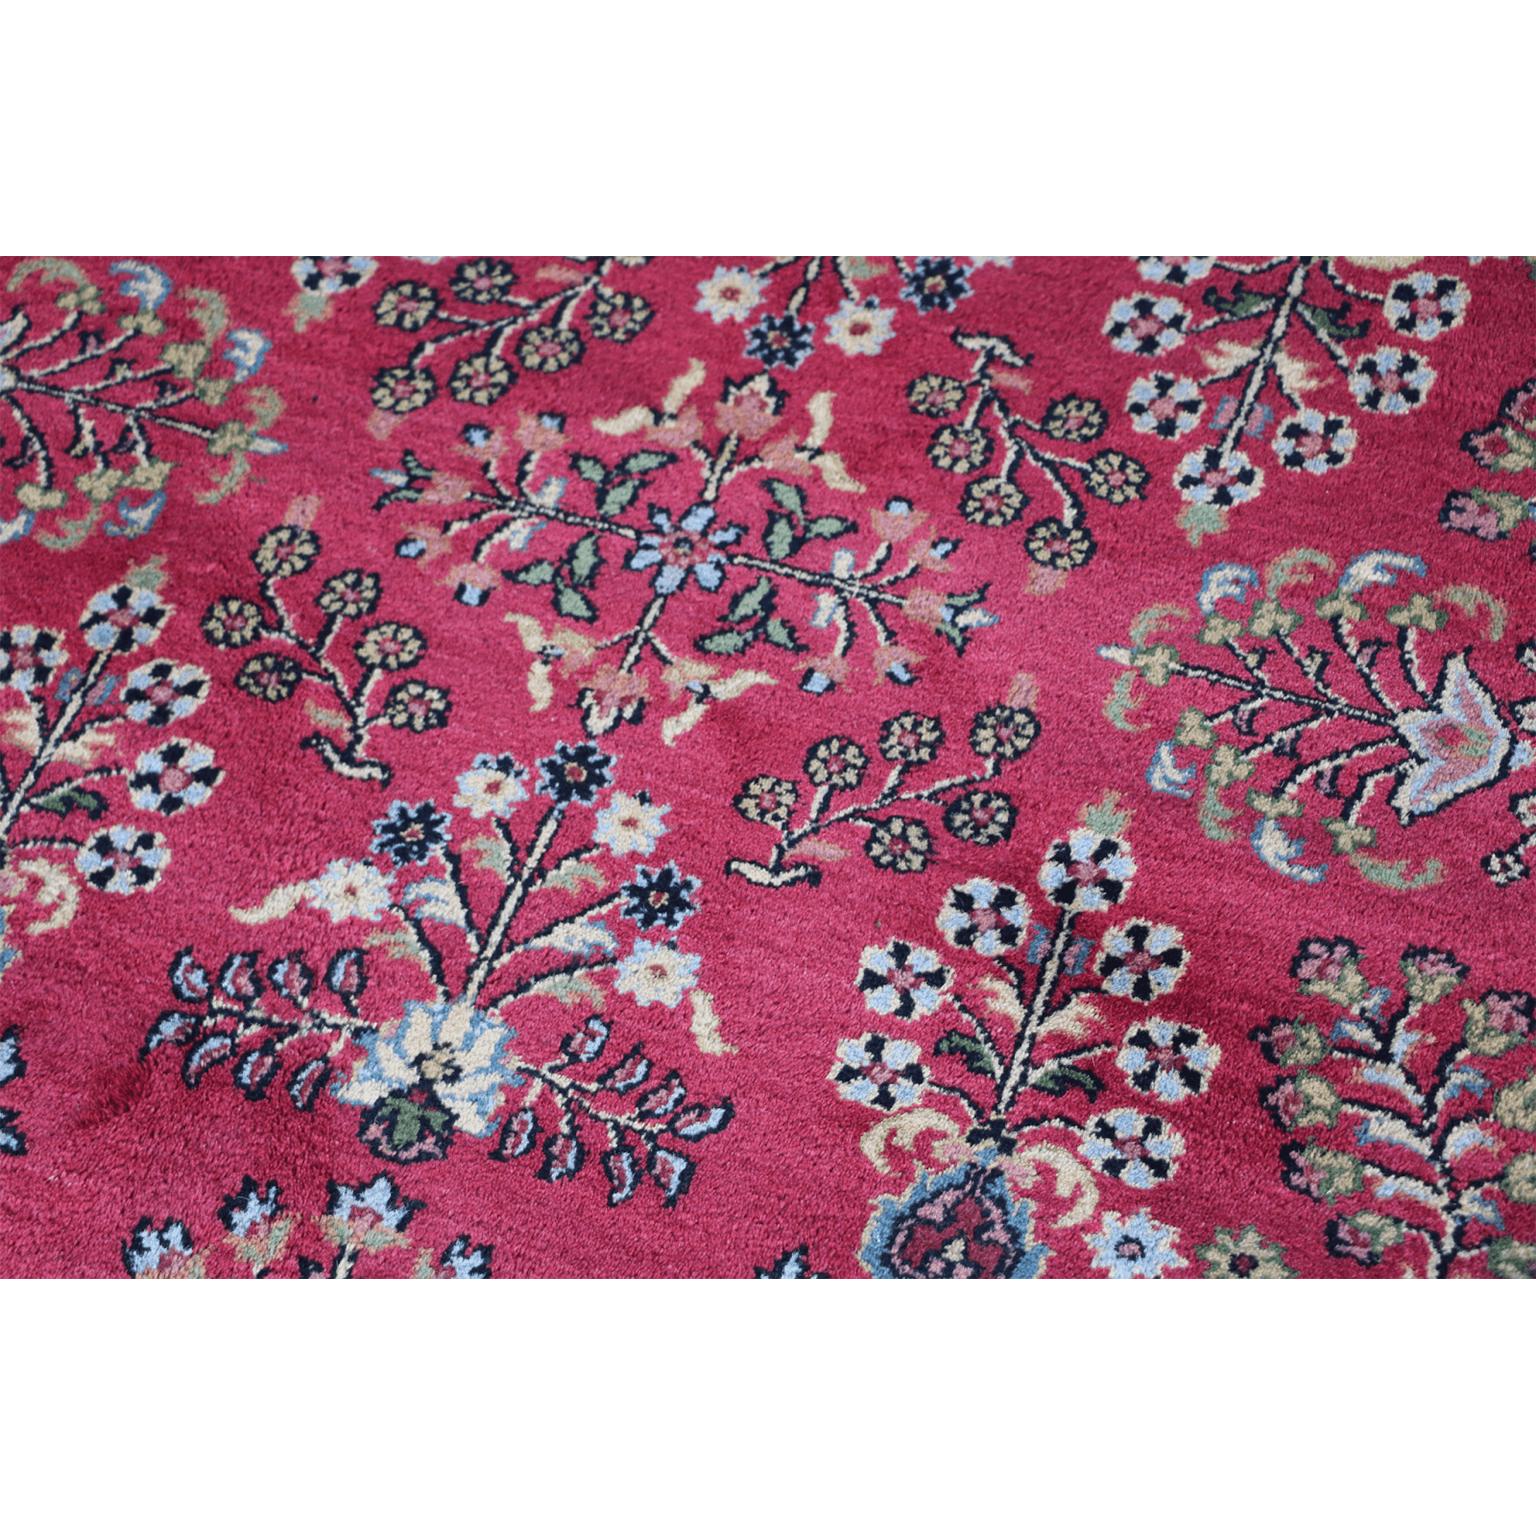 The rose red field with a central skeletal floral medallion radiating flowering plants, within a blue palmette and vine border. A very fine hand knotted Indo Sarough wool on cotton foundation circular rug, made in North India.
The term Sarough